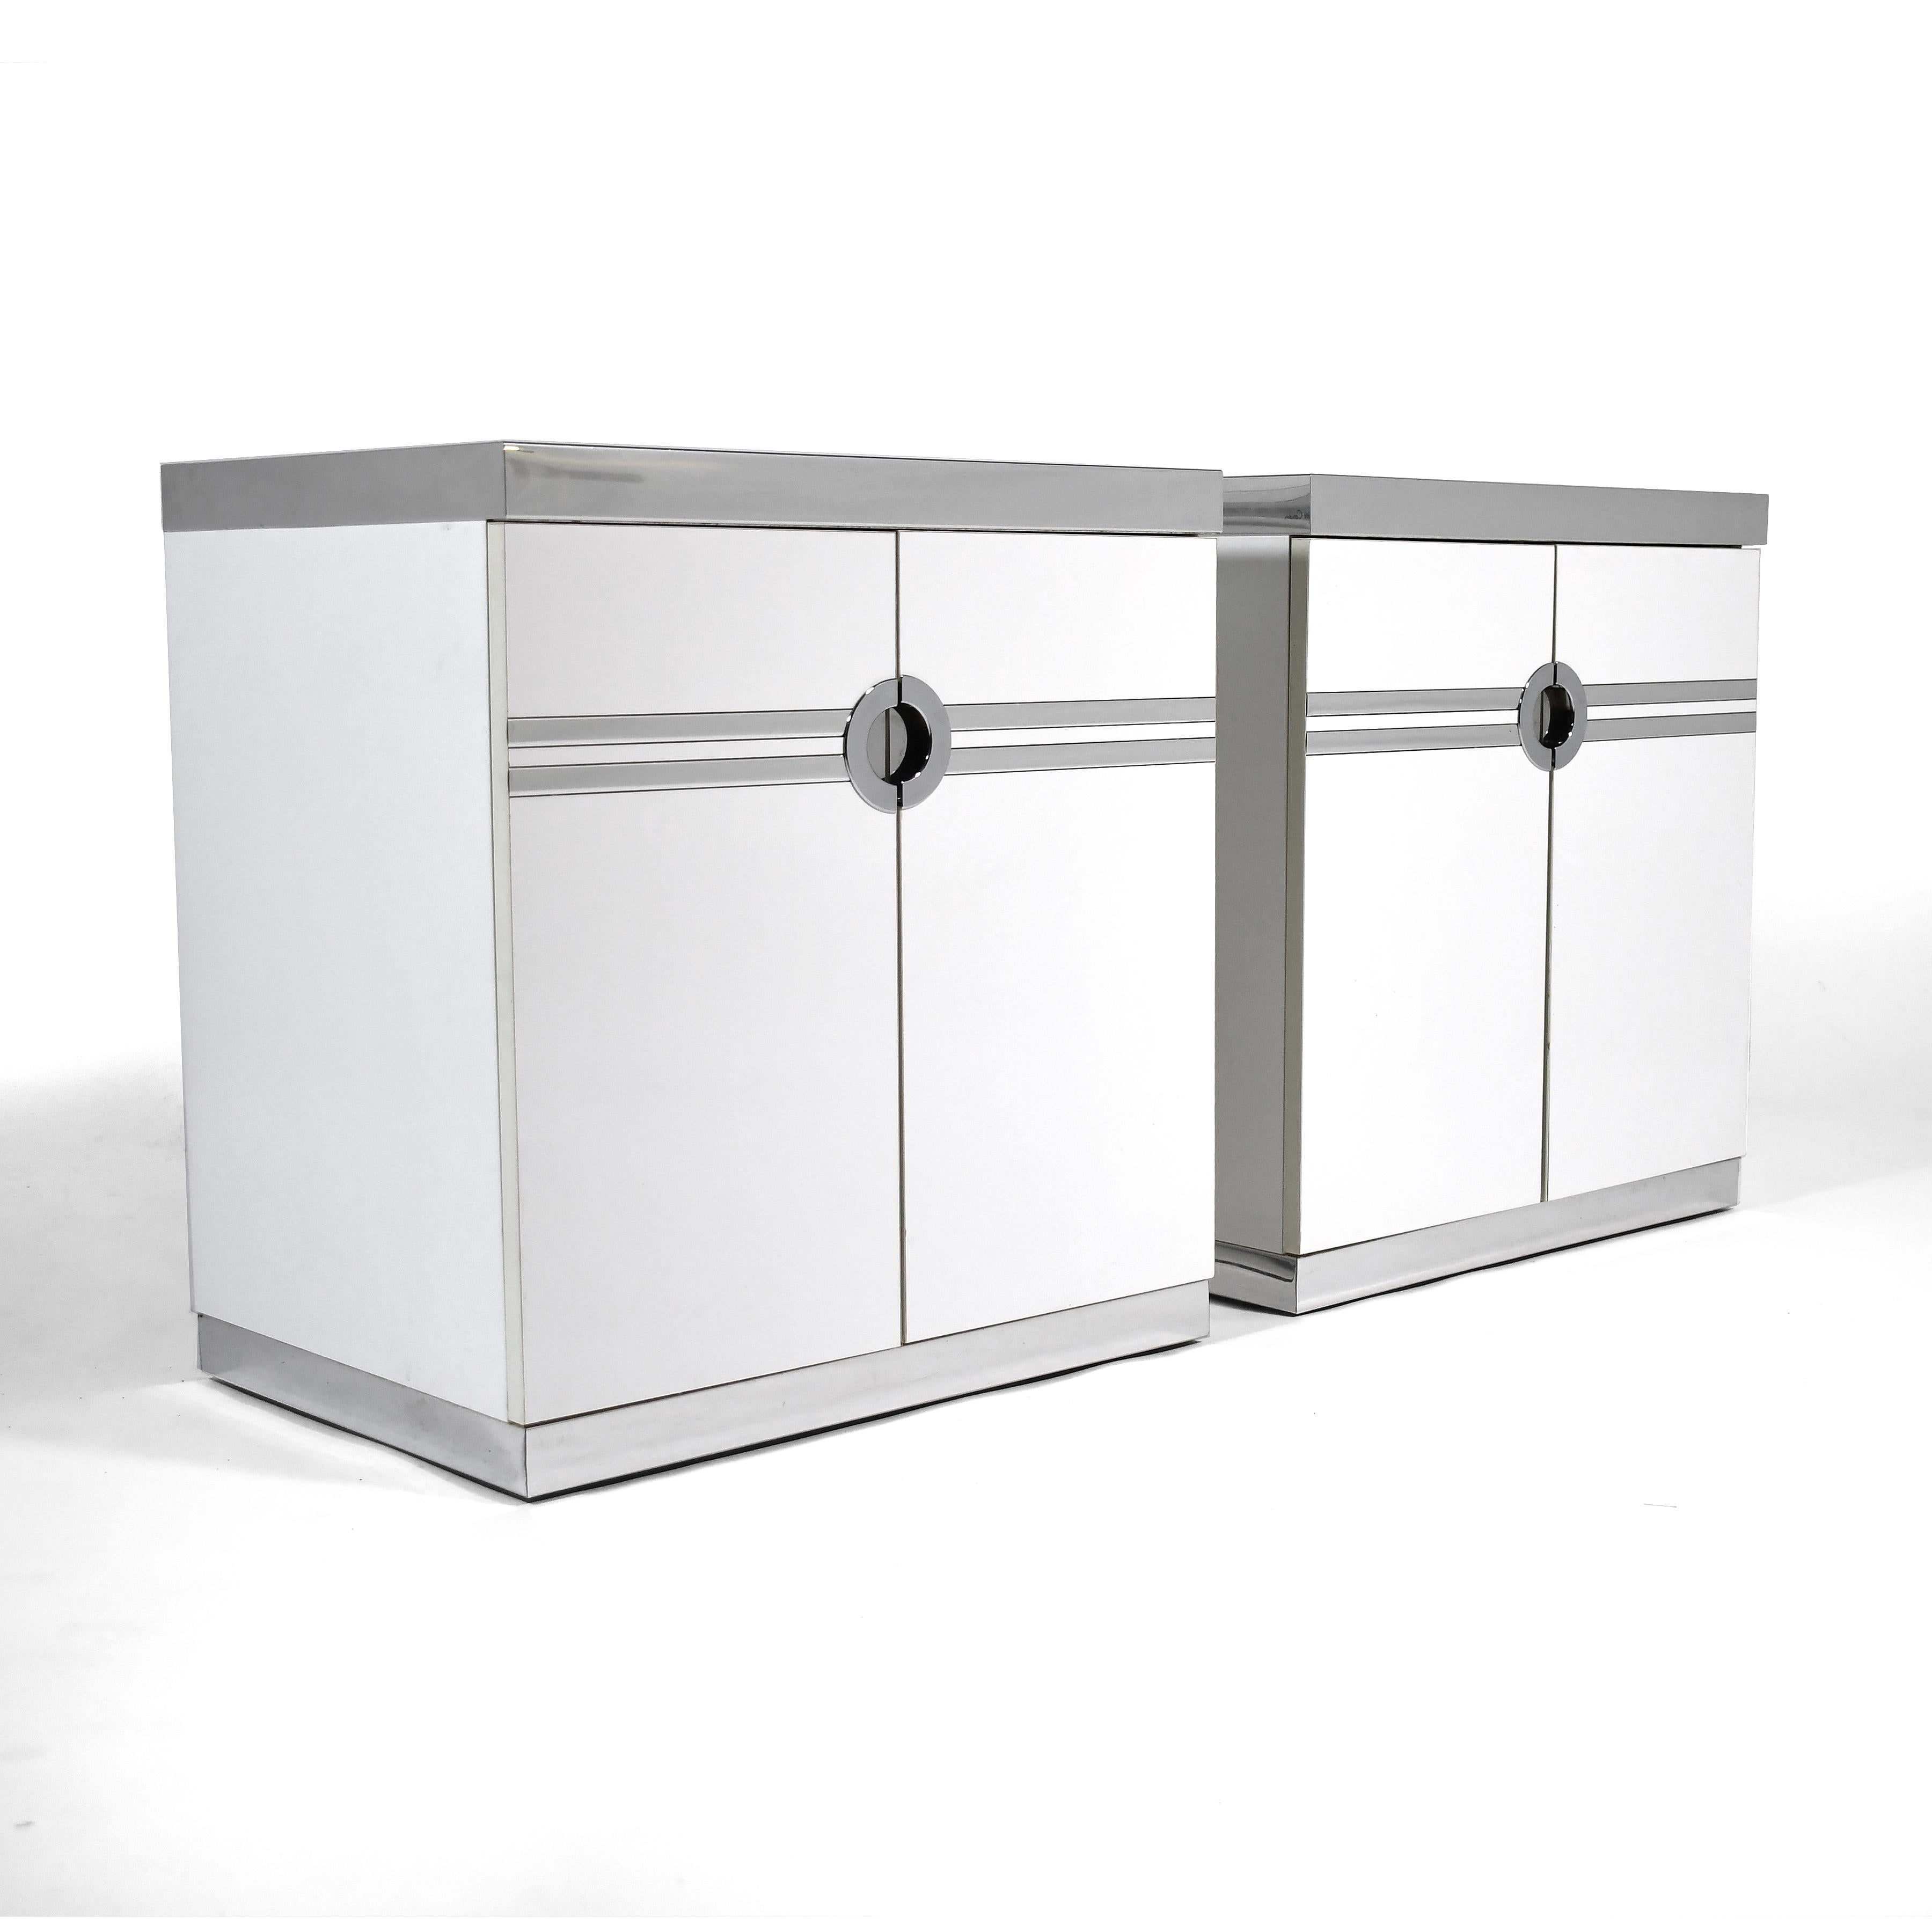 Pierre Cardin's classic aesthetic is on full display with this beautiful pair of nightstands made for the French designer in the US by Dillingham.

The white cases have linear graphic elements and recessed pulls in chrome. The two doors on each